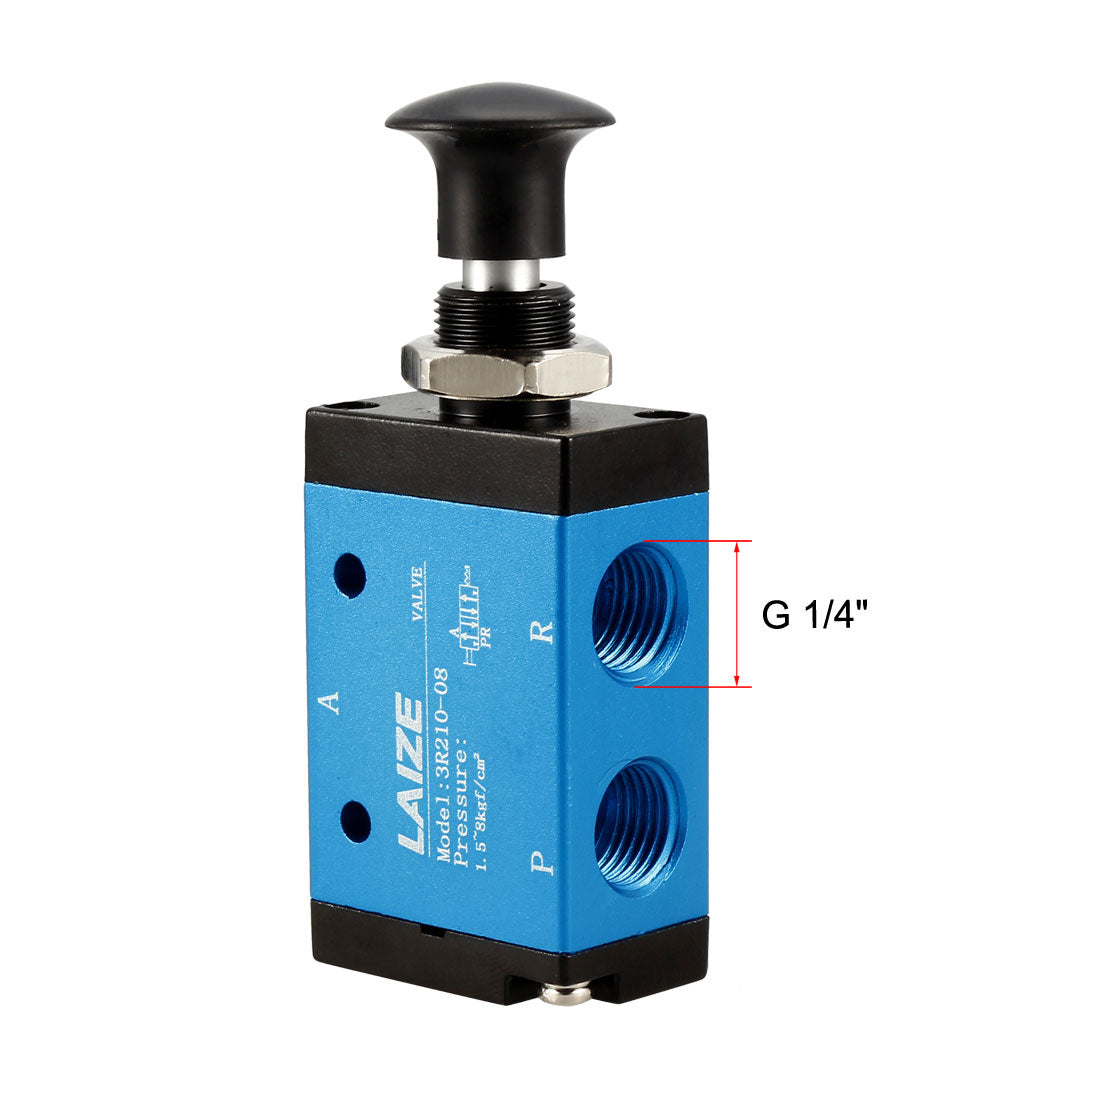 uxcell Uxcell 2 Position 3 Way G1/4 Aluminum Alloy Hand Valve Electric Solenoid Valve Manual Controlled Direct Acting Type 2pcs